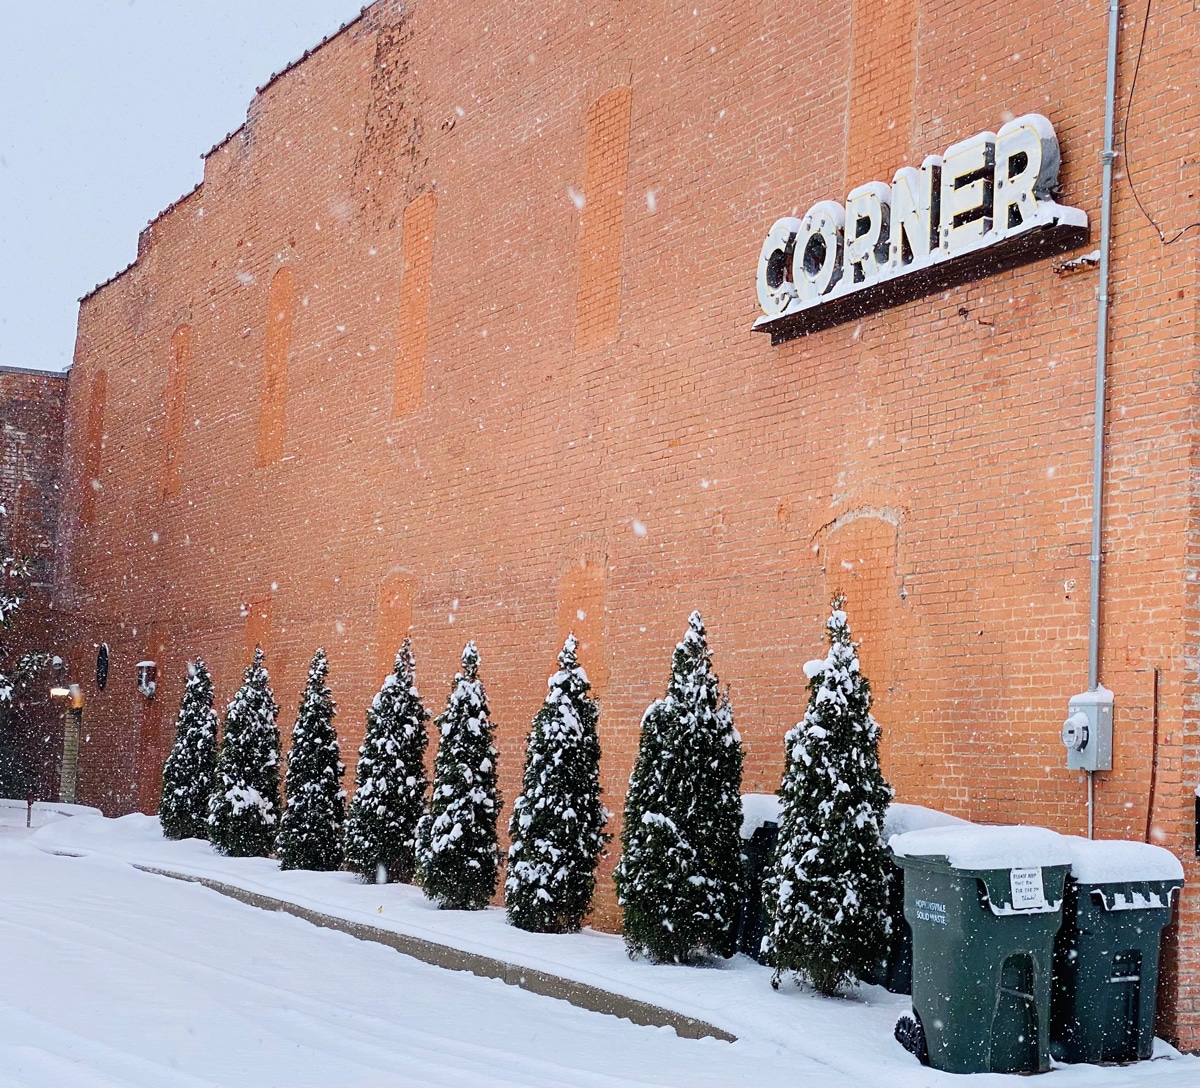 Snow rests on evergreen trees that line the Butter and Grace building at Seventh and Virginia streets in Hopkinsville on Thursday, Jan. 6, 2022. (Photo by Jennifer P. Brown)